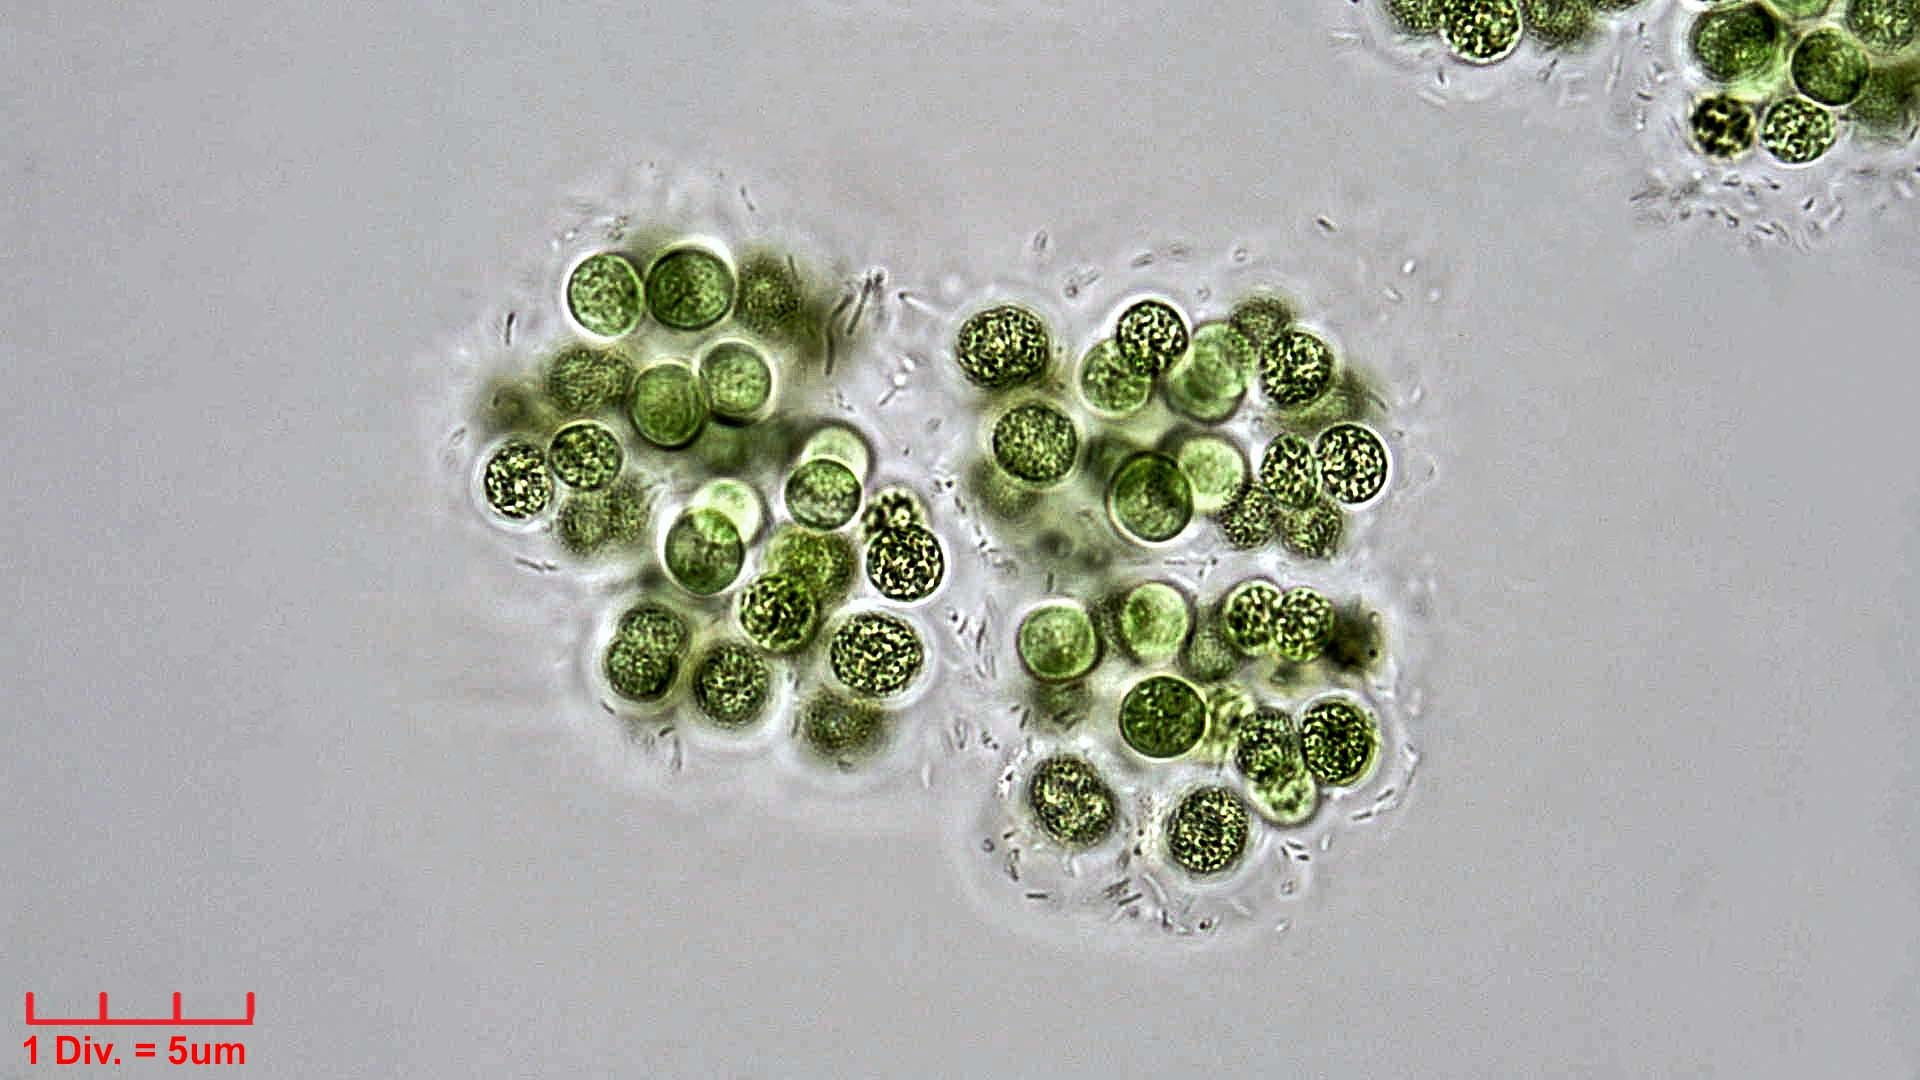 Cyanobacteria/Chroococcales/Microcystaceae/Microcystis/viridis/microcystis-viridis-68.jpg